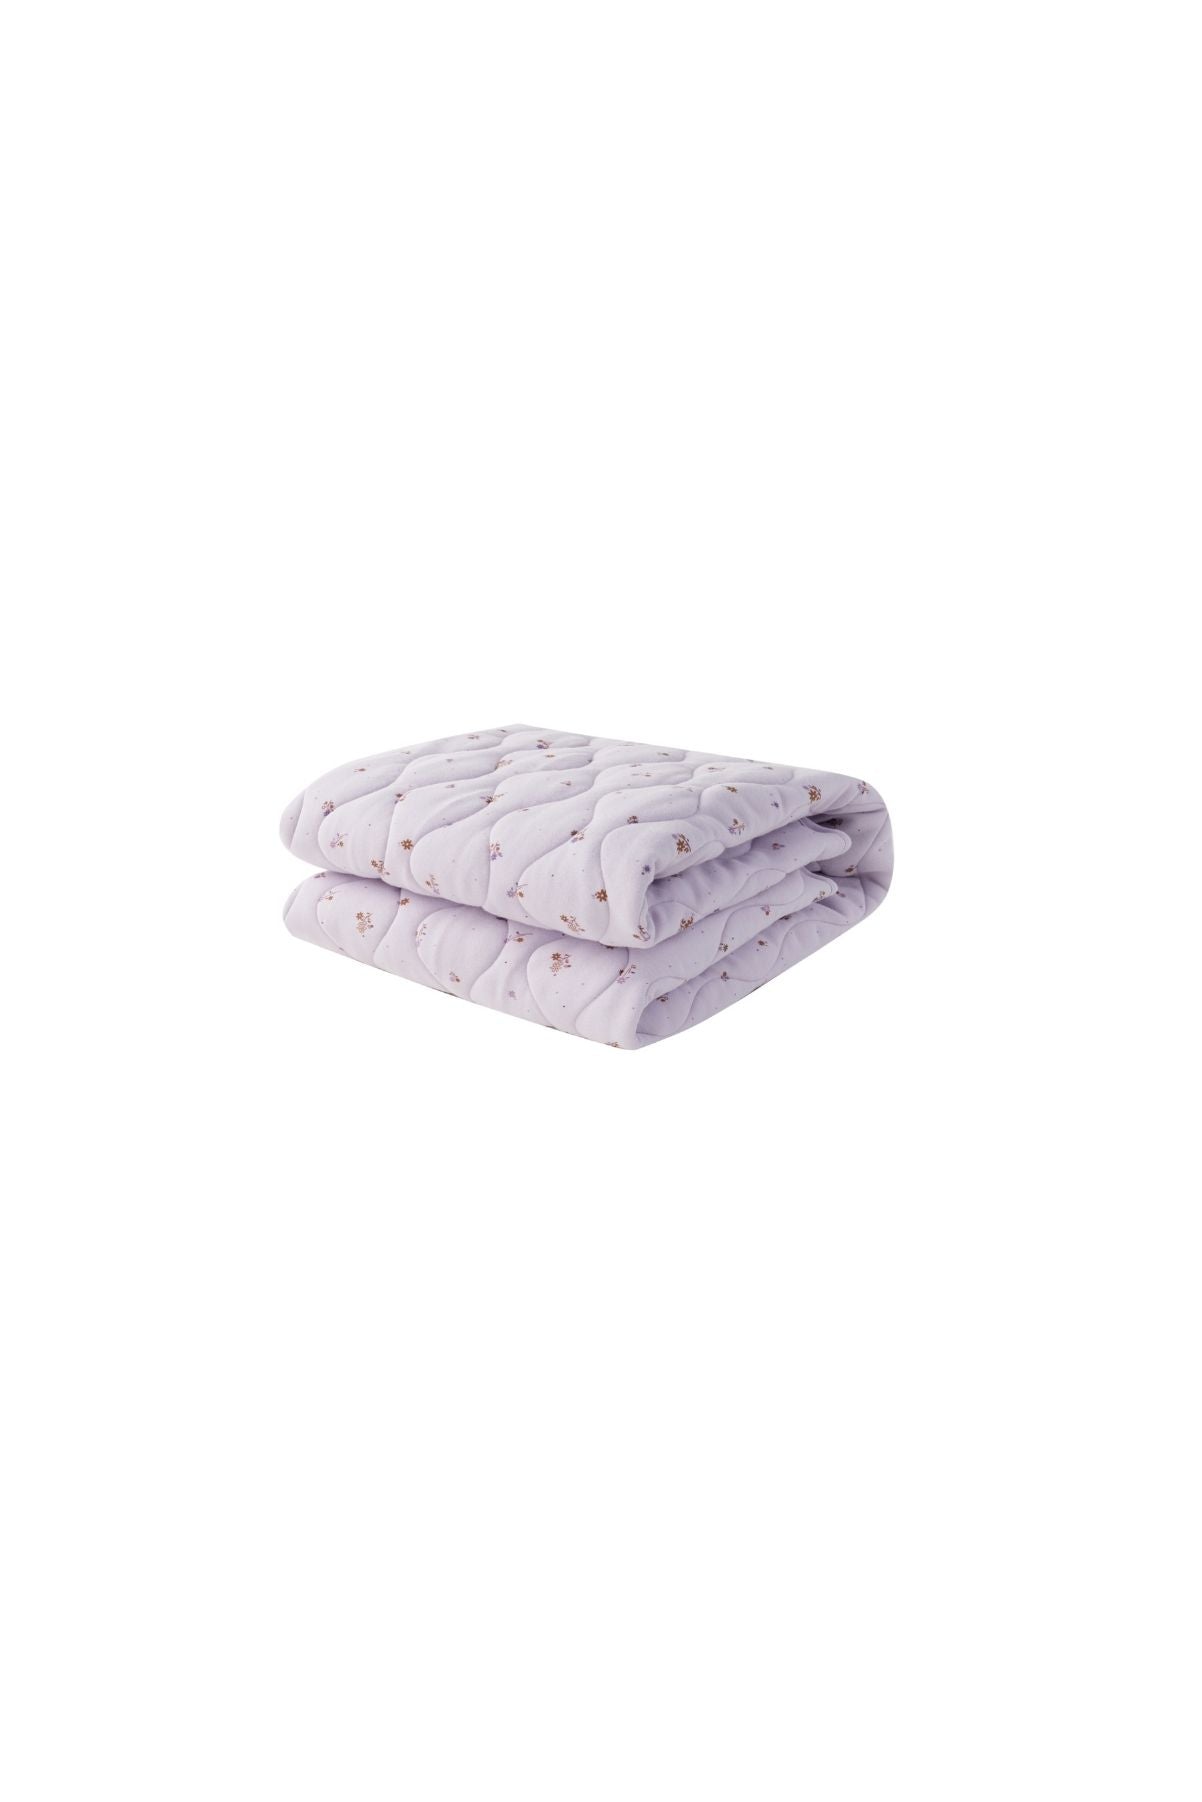 image for Organic Cotton Quilted Blanket-Violet